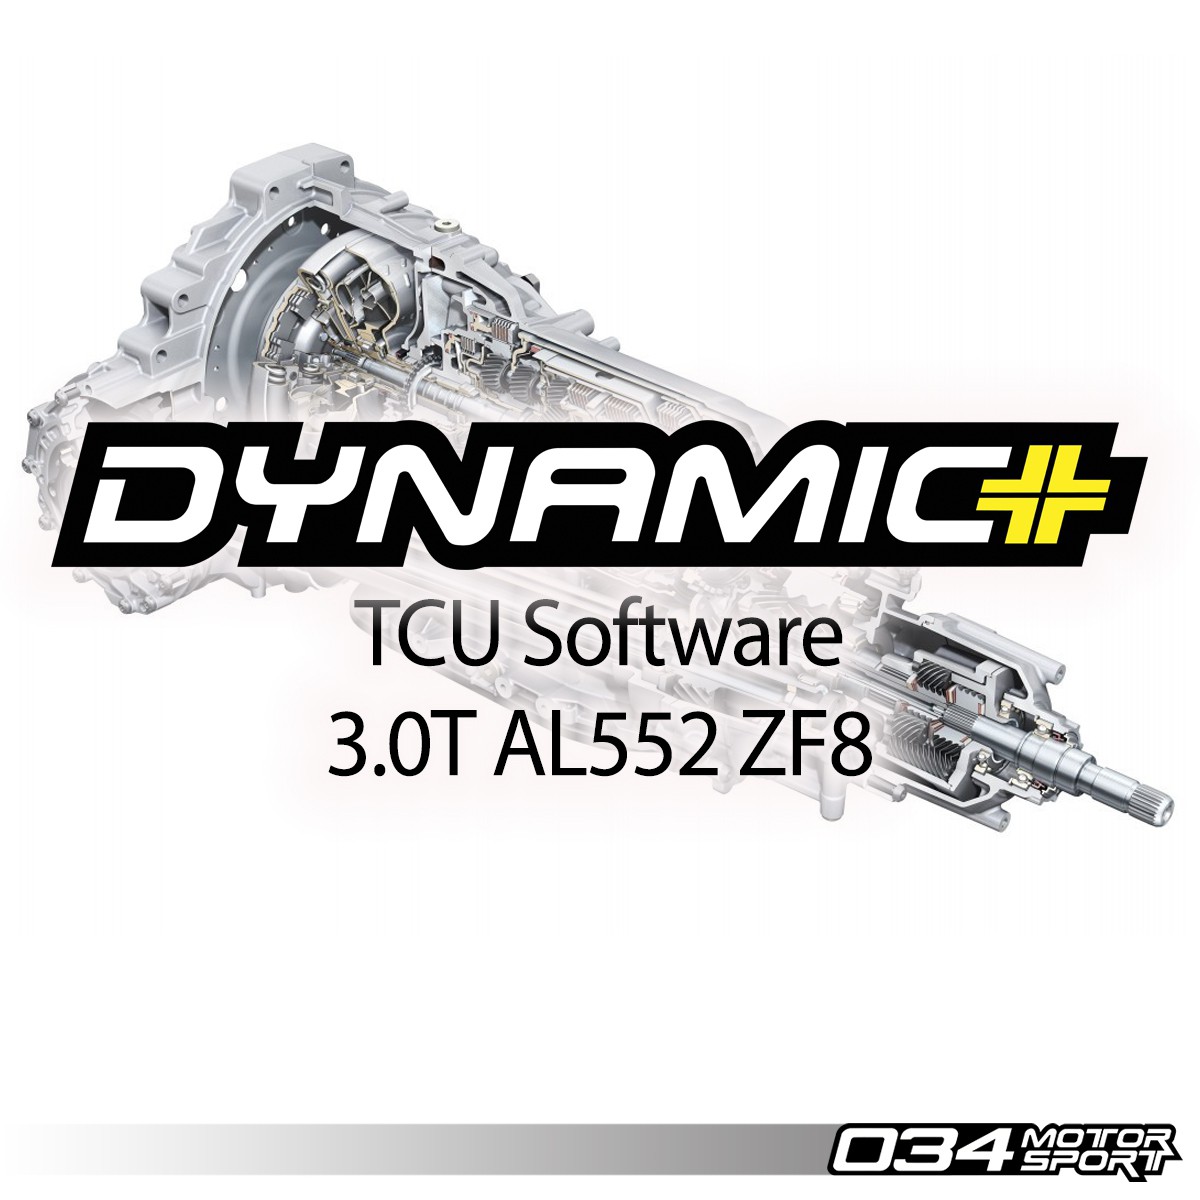 Dynamic+ Stage 2 TCU Software Upgrade for AL552 ZF8 Transmission, B9 S4/S5/SQ5 034-103-2561